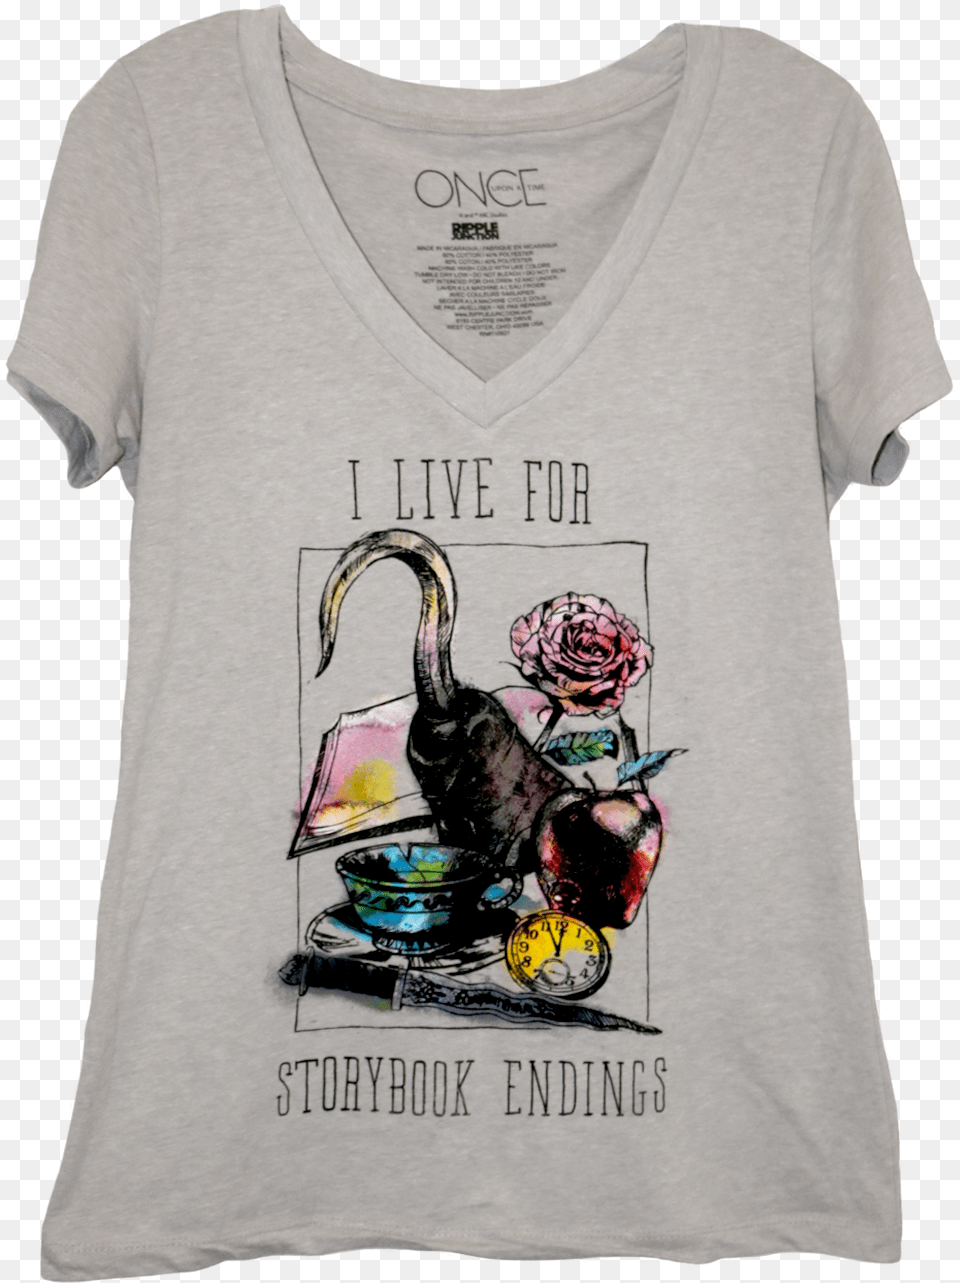 A V Neck T Shirt With Watercolor Images Of A Hook Live For Storybook Endings Shirt, Clothing, T-shirt, Cup, Flower Free Png Download